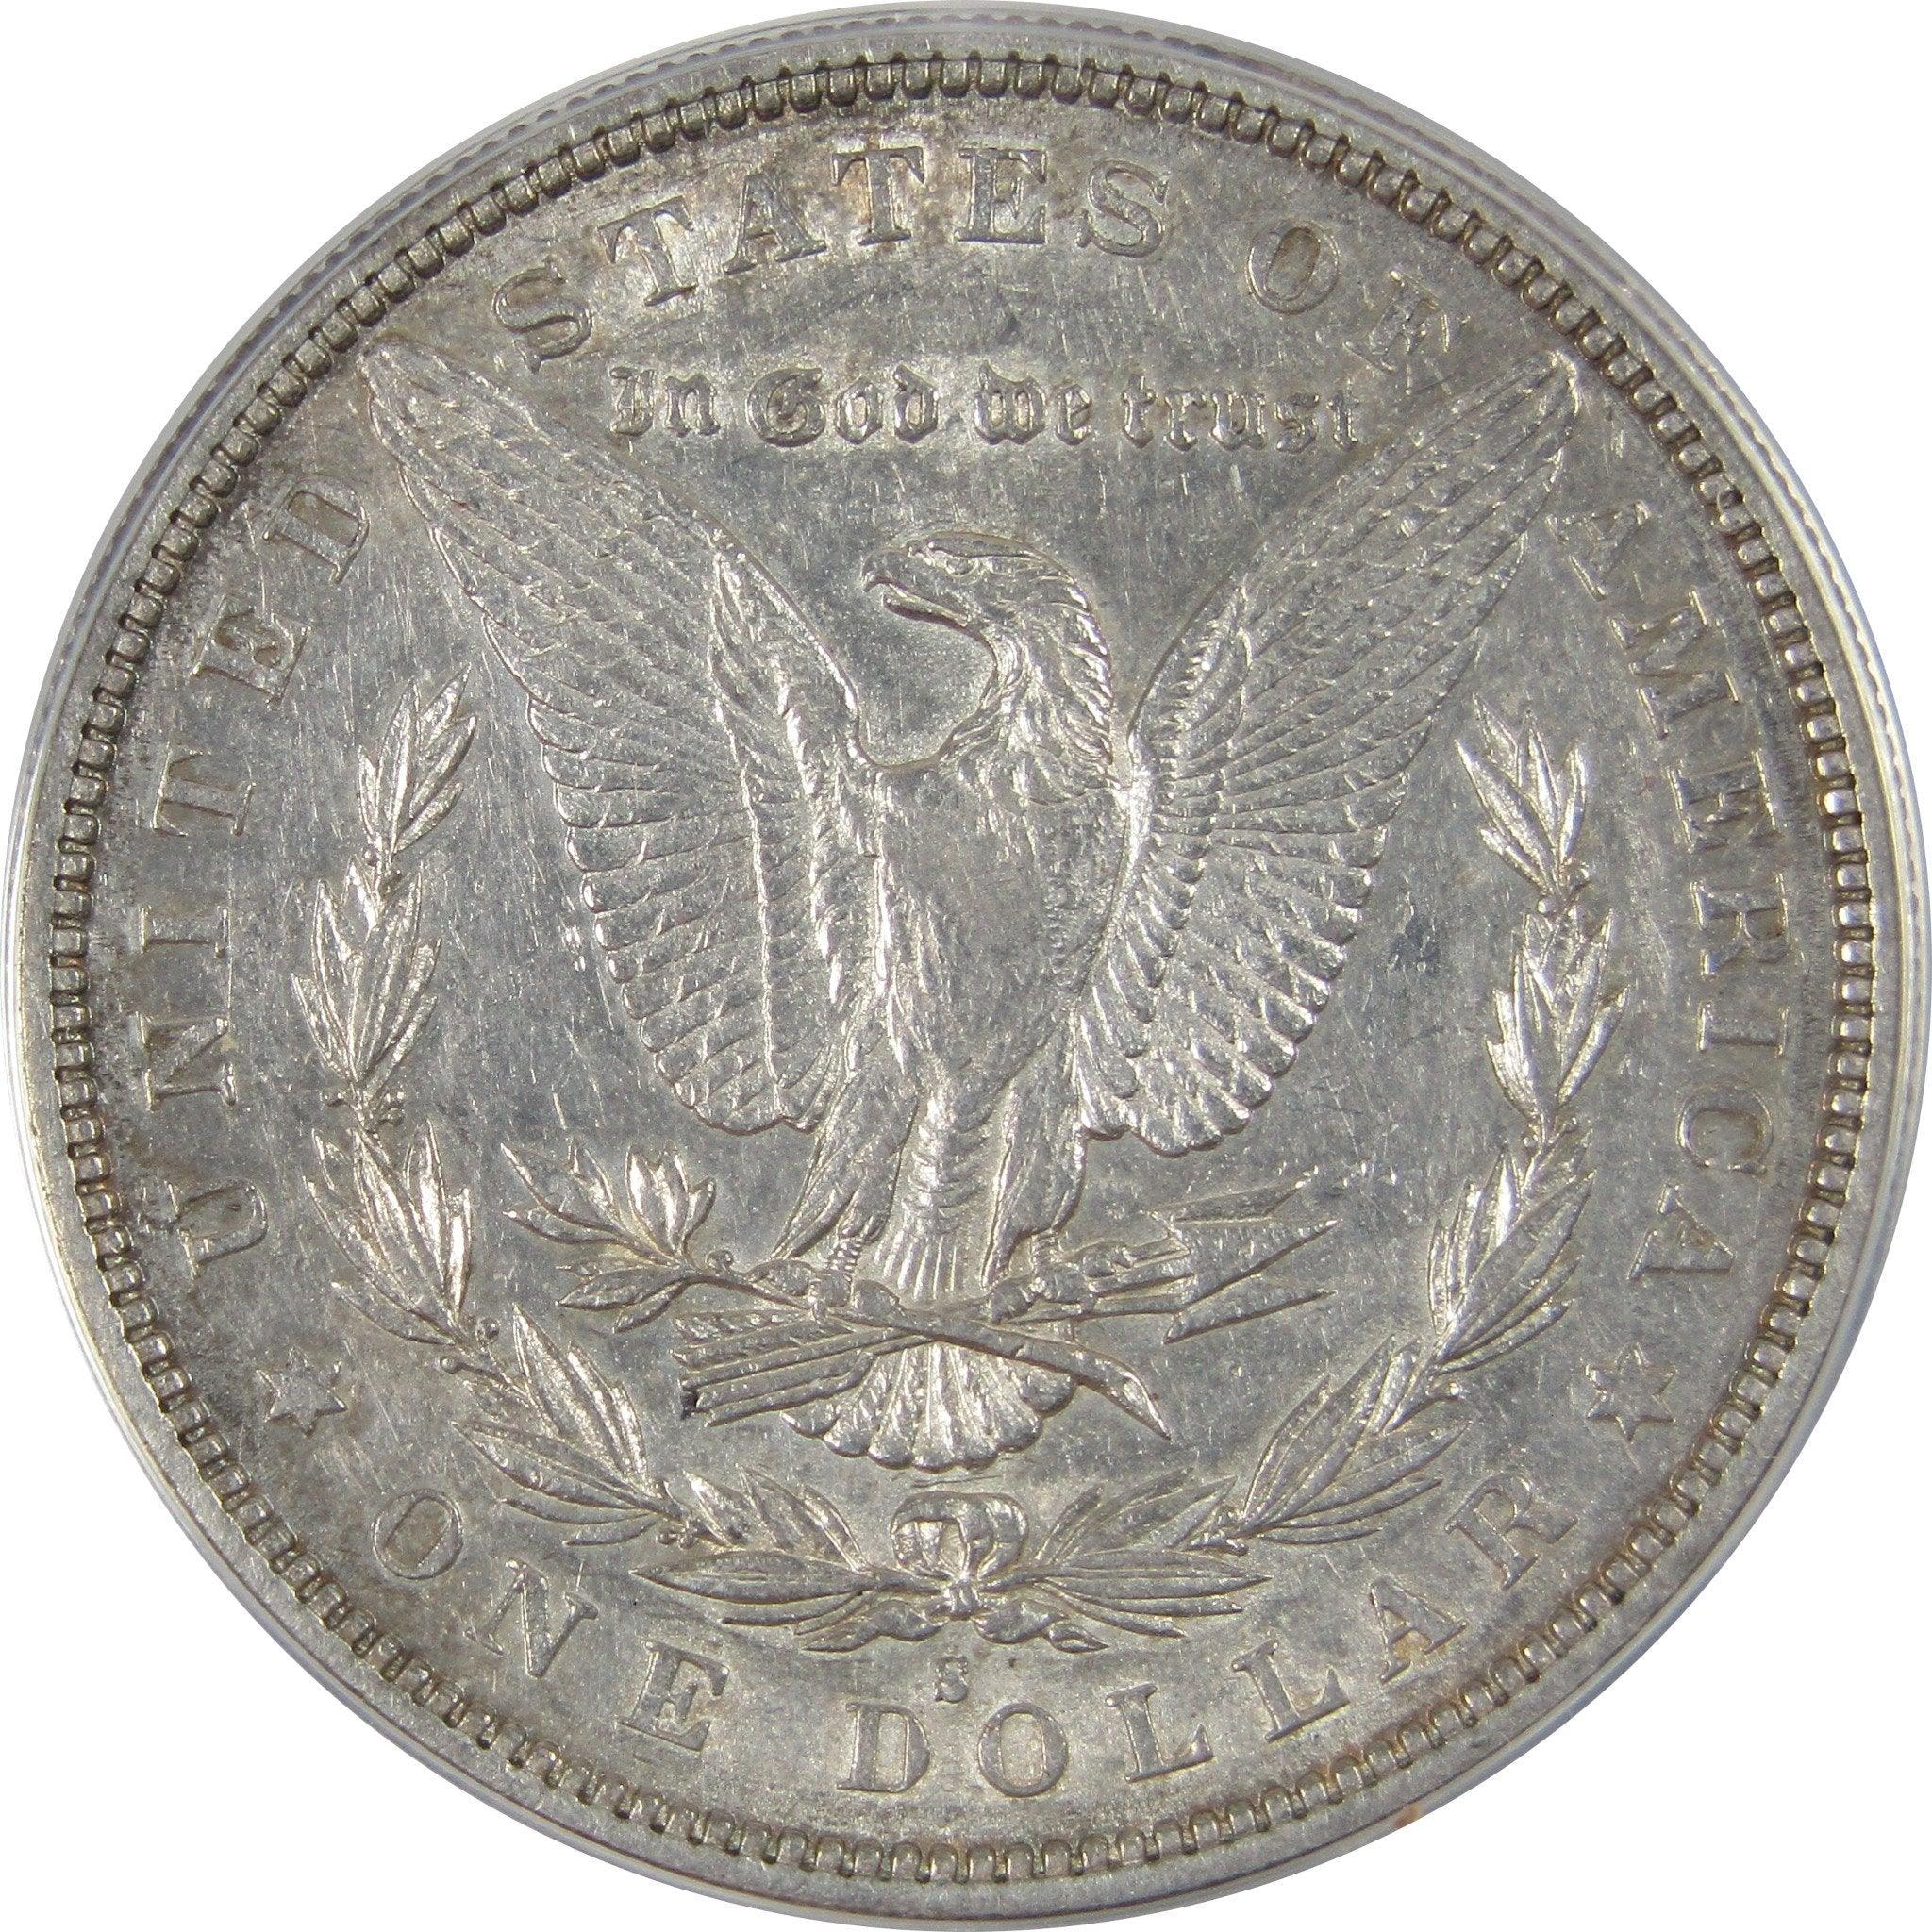 1883 S Morgan Dollar AU 50 Details ANACS 90% Silver SKU:CPC1163 - Morgan coin - Morgan silver dollar - Morgan silver dollar for sale - Profile Coins &amp; Collectibles